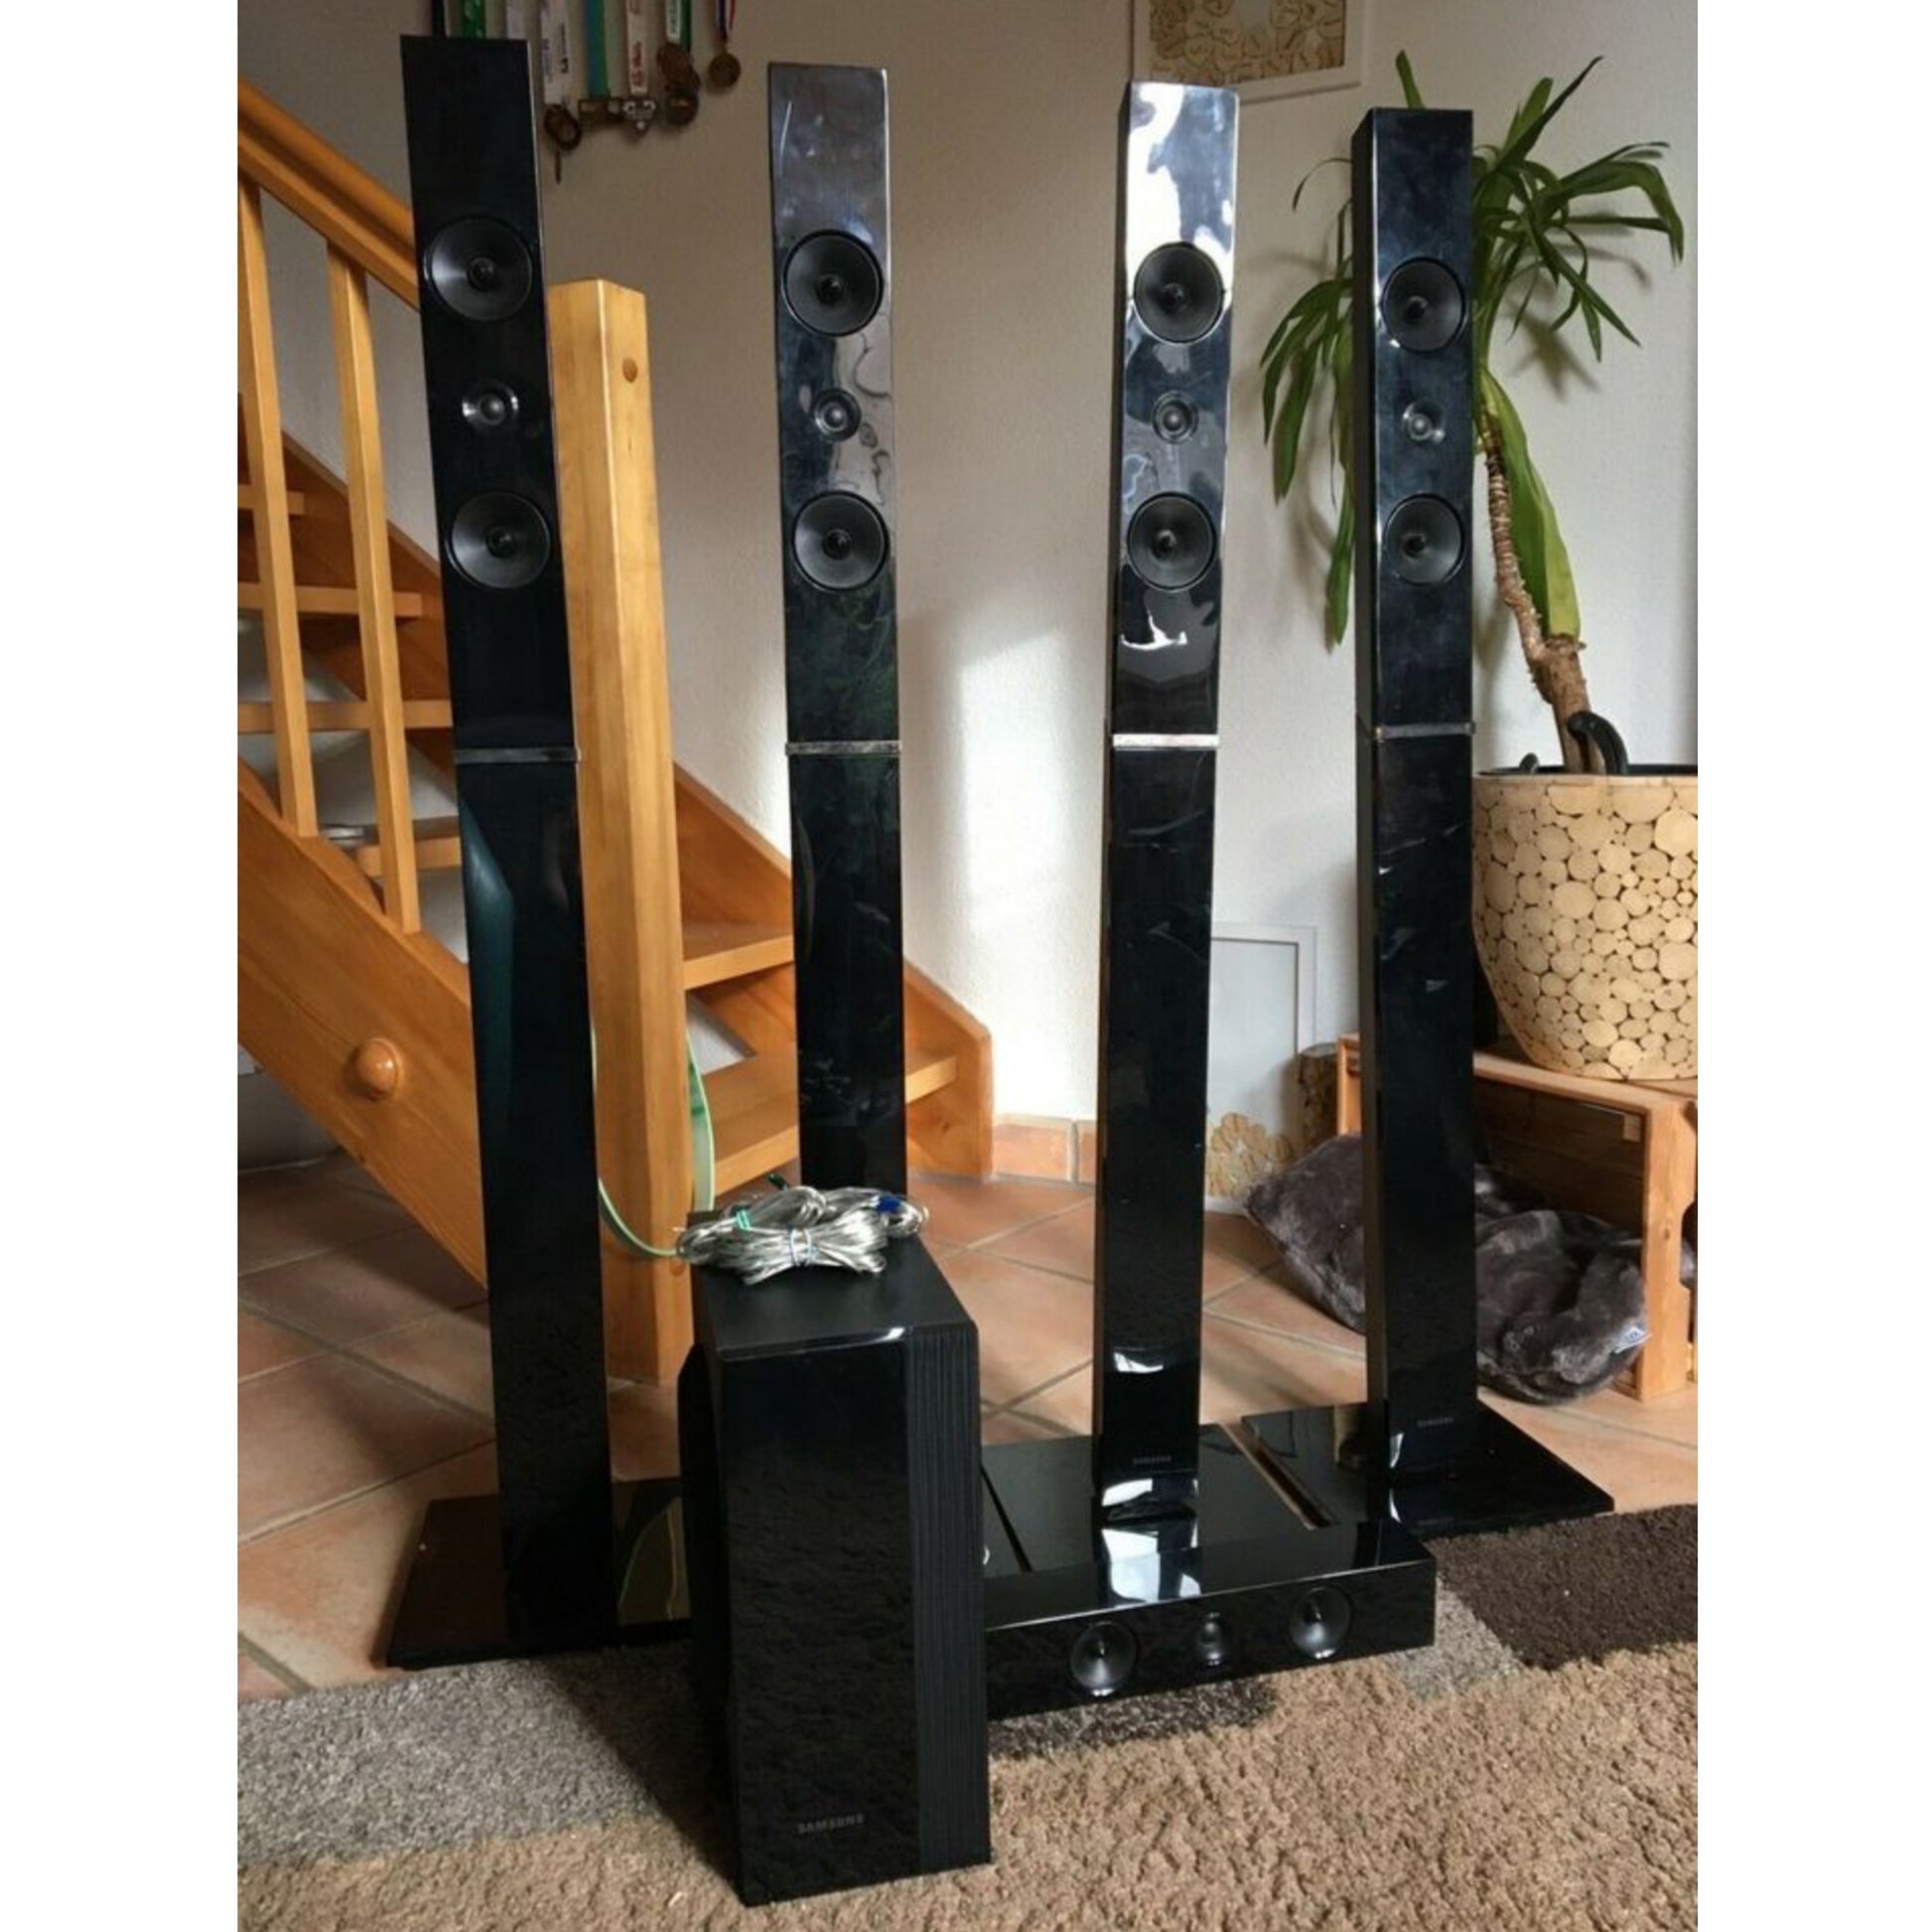 Samsung HT-E6500W 5.1 Channel Home Theater System for sale online